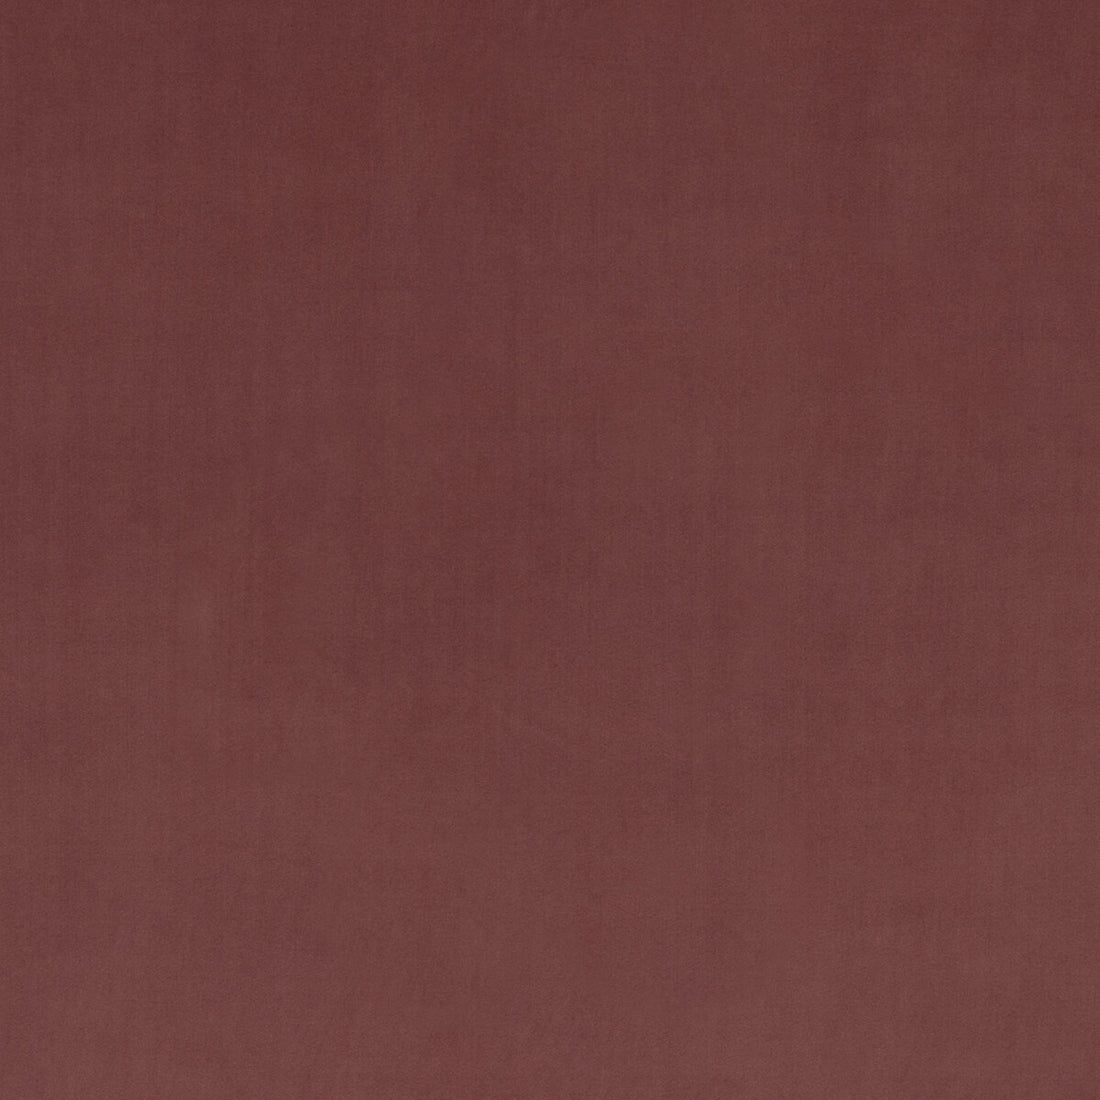 Montpellier Velvet fabric in tuscan red color - pattern PF50417.438.0 - by Baker Lifestyle in the Carnival collection